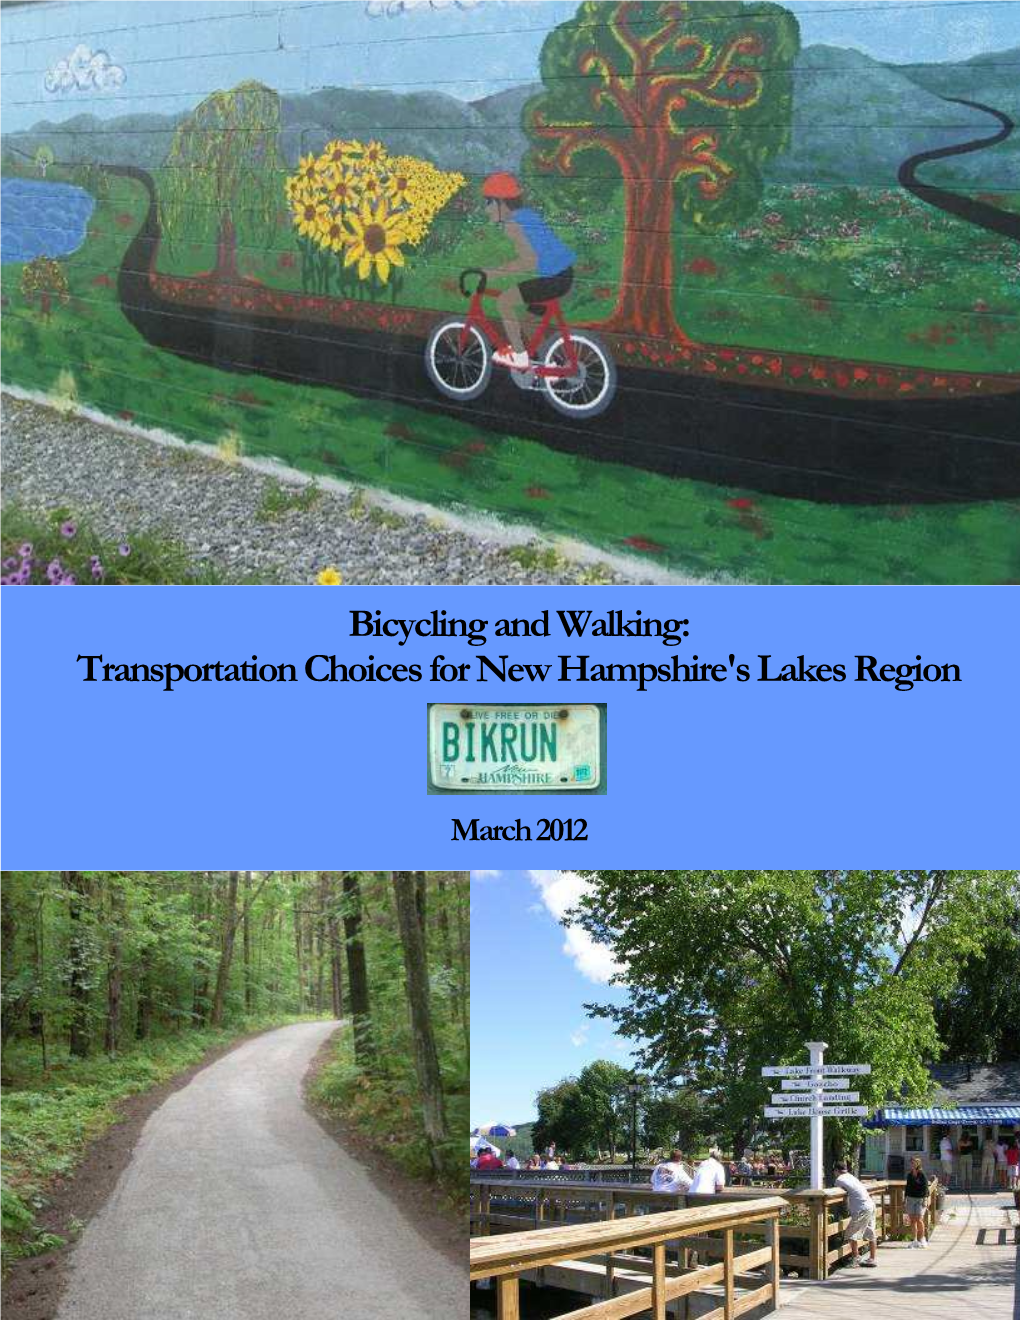 Bicycling and Walking: Transportation Choices for New Hampshire's Lakes Region